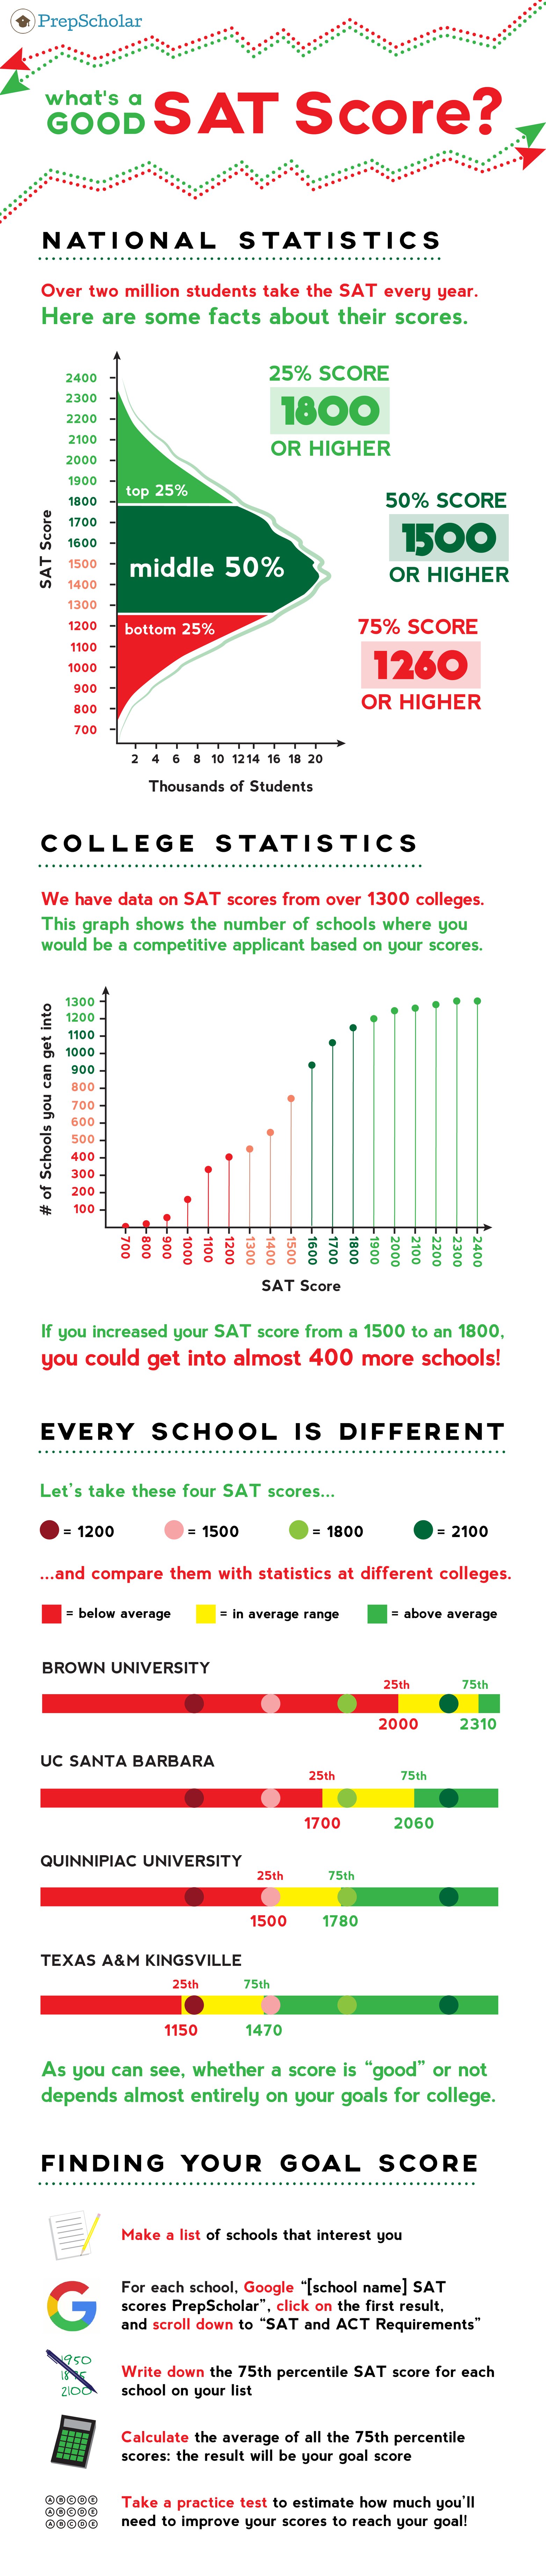 Infographic What's a Good SAT Score for College?